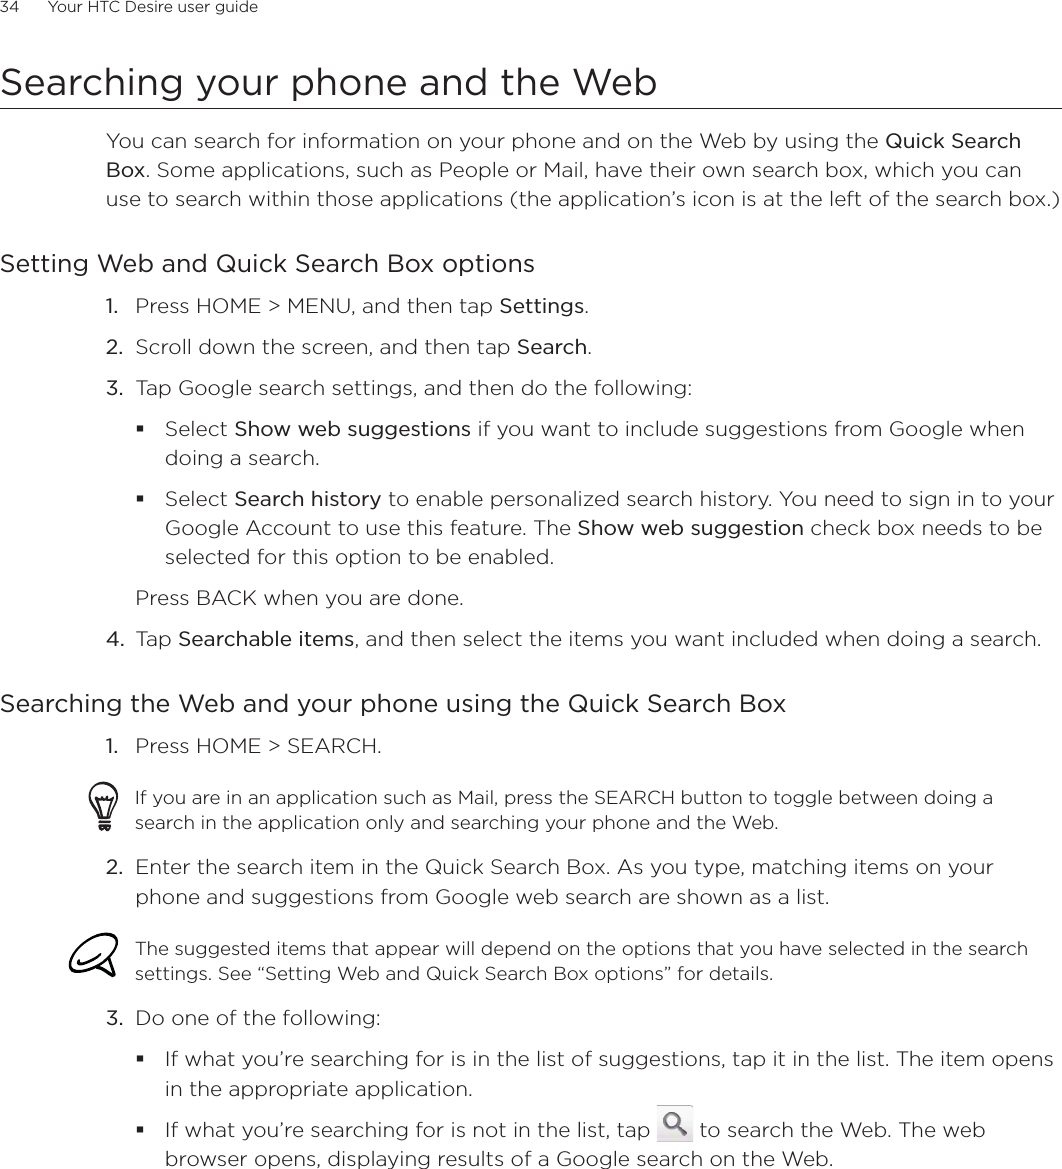 34      Your HTC Desire user guide      Searching your phone and the WebYou can search for information on your phone and on the Web by using the Quick Search Box. Some applications, such as People or Mail, have their own search box, which you can use to search within those applications (the application’s icon is at the left of the search box.)Setting Web and Quick Search Box optionsPress HOME &gt; MENU, and then tap Settings.Scroll down the screen, and then tap Search.Tap Google search settings, and then do the following:Select Show web suggestions if you want to include suggestions from Google when doing a search.Select Search history to enable personalized search history. You need to sign in to your Google Account to use this feature. The Show web suggestion check box needs to be selected for this option to be enabled. Press BACK when you are done. 4. Tap Searchable items, and then select the items you want included when doing a search. Searching the Web and your phone using the Quick Search BoxPress HOME &gt; SEARCH. If you are in an application such as Mail, press the SEARCH button to toggle between doing a search in the application only and searching your phone and the Web. 2. Enter the search item in the Quick Search Box. As you type, matching items on your phone and suggestions from Google web search are shown as a list.The suggested items that appear will depend on the options that you have selected in the search settings. See “Setting Web and Quick Search Box options” for details. 3. Do one of the following:If what you’re searching for is in the list of suggestions, tap it in the list. The item opens in the appropriate application.If what you’re searching for is not in the list, tap   to search the Web. The web browser opens, displaying results of a Google search on the Web.1.2.3.1.